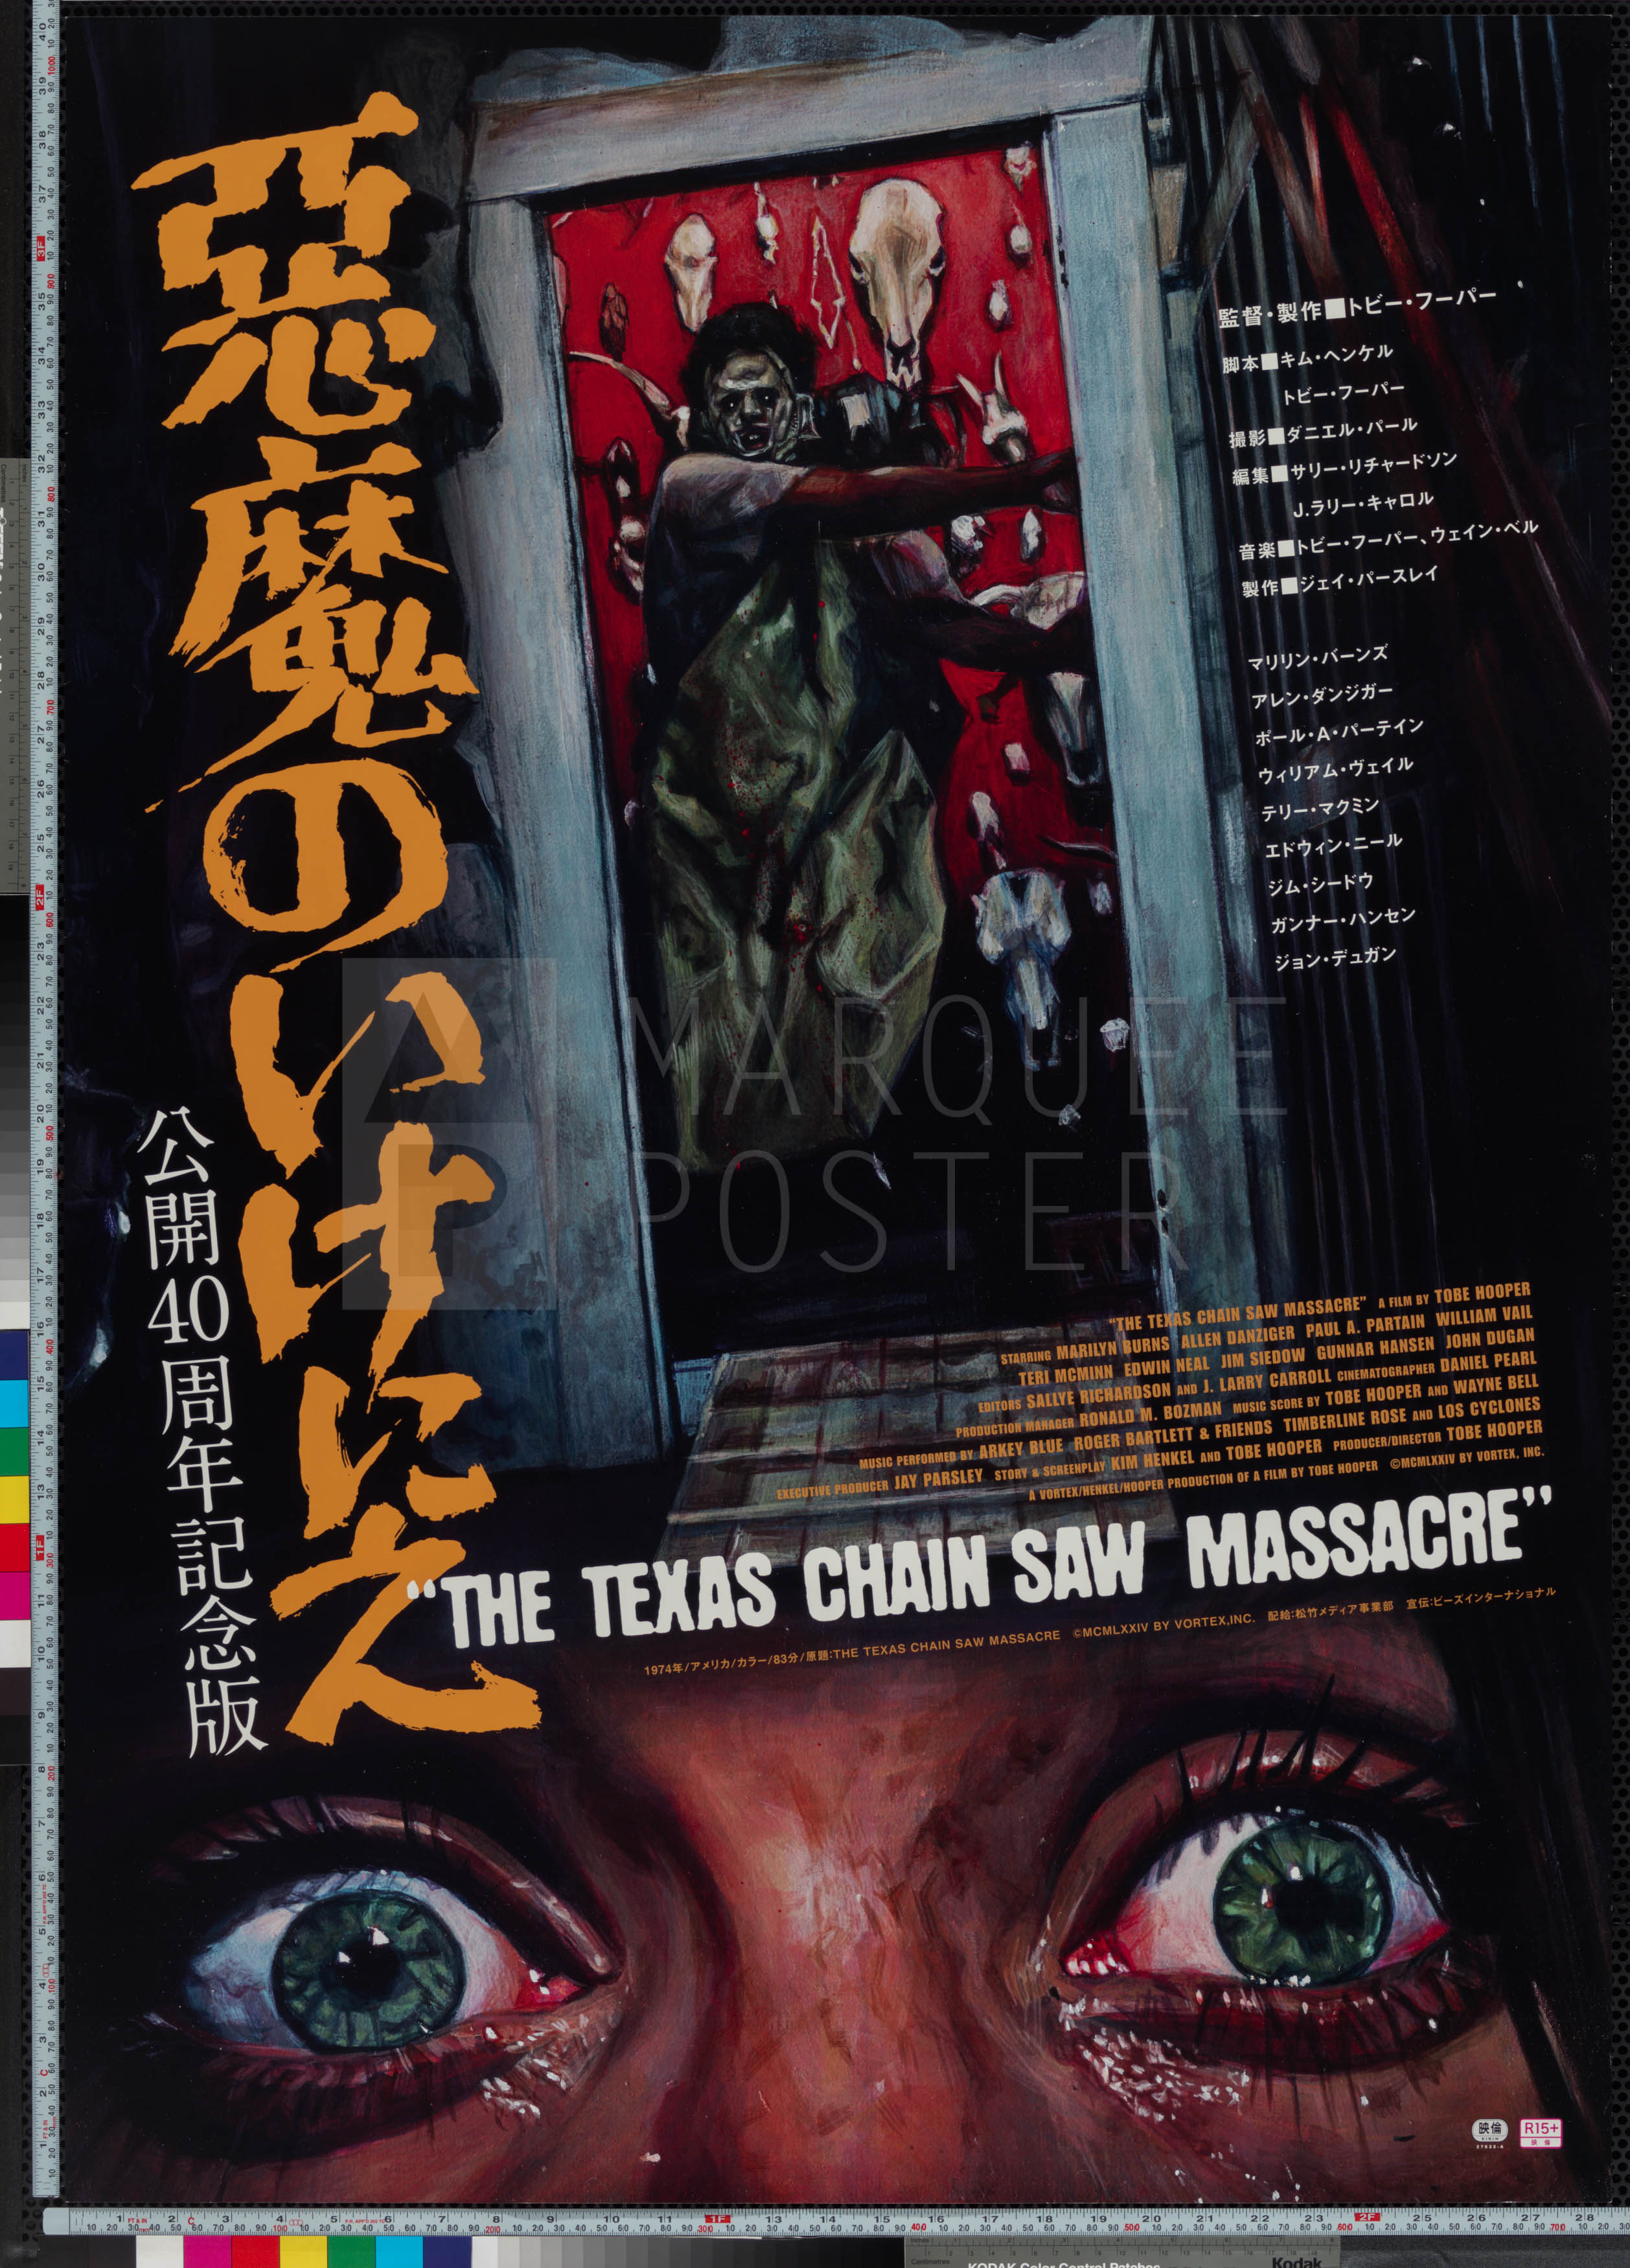 82-texas-chainsaw-massacre-40th-anniversary-re-release-japanese-b1-2014-02